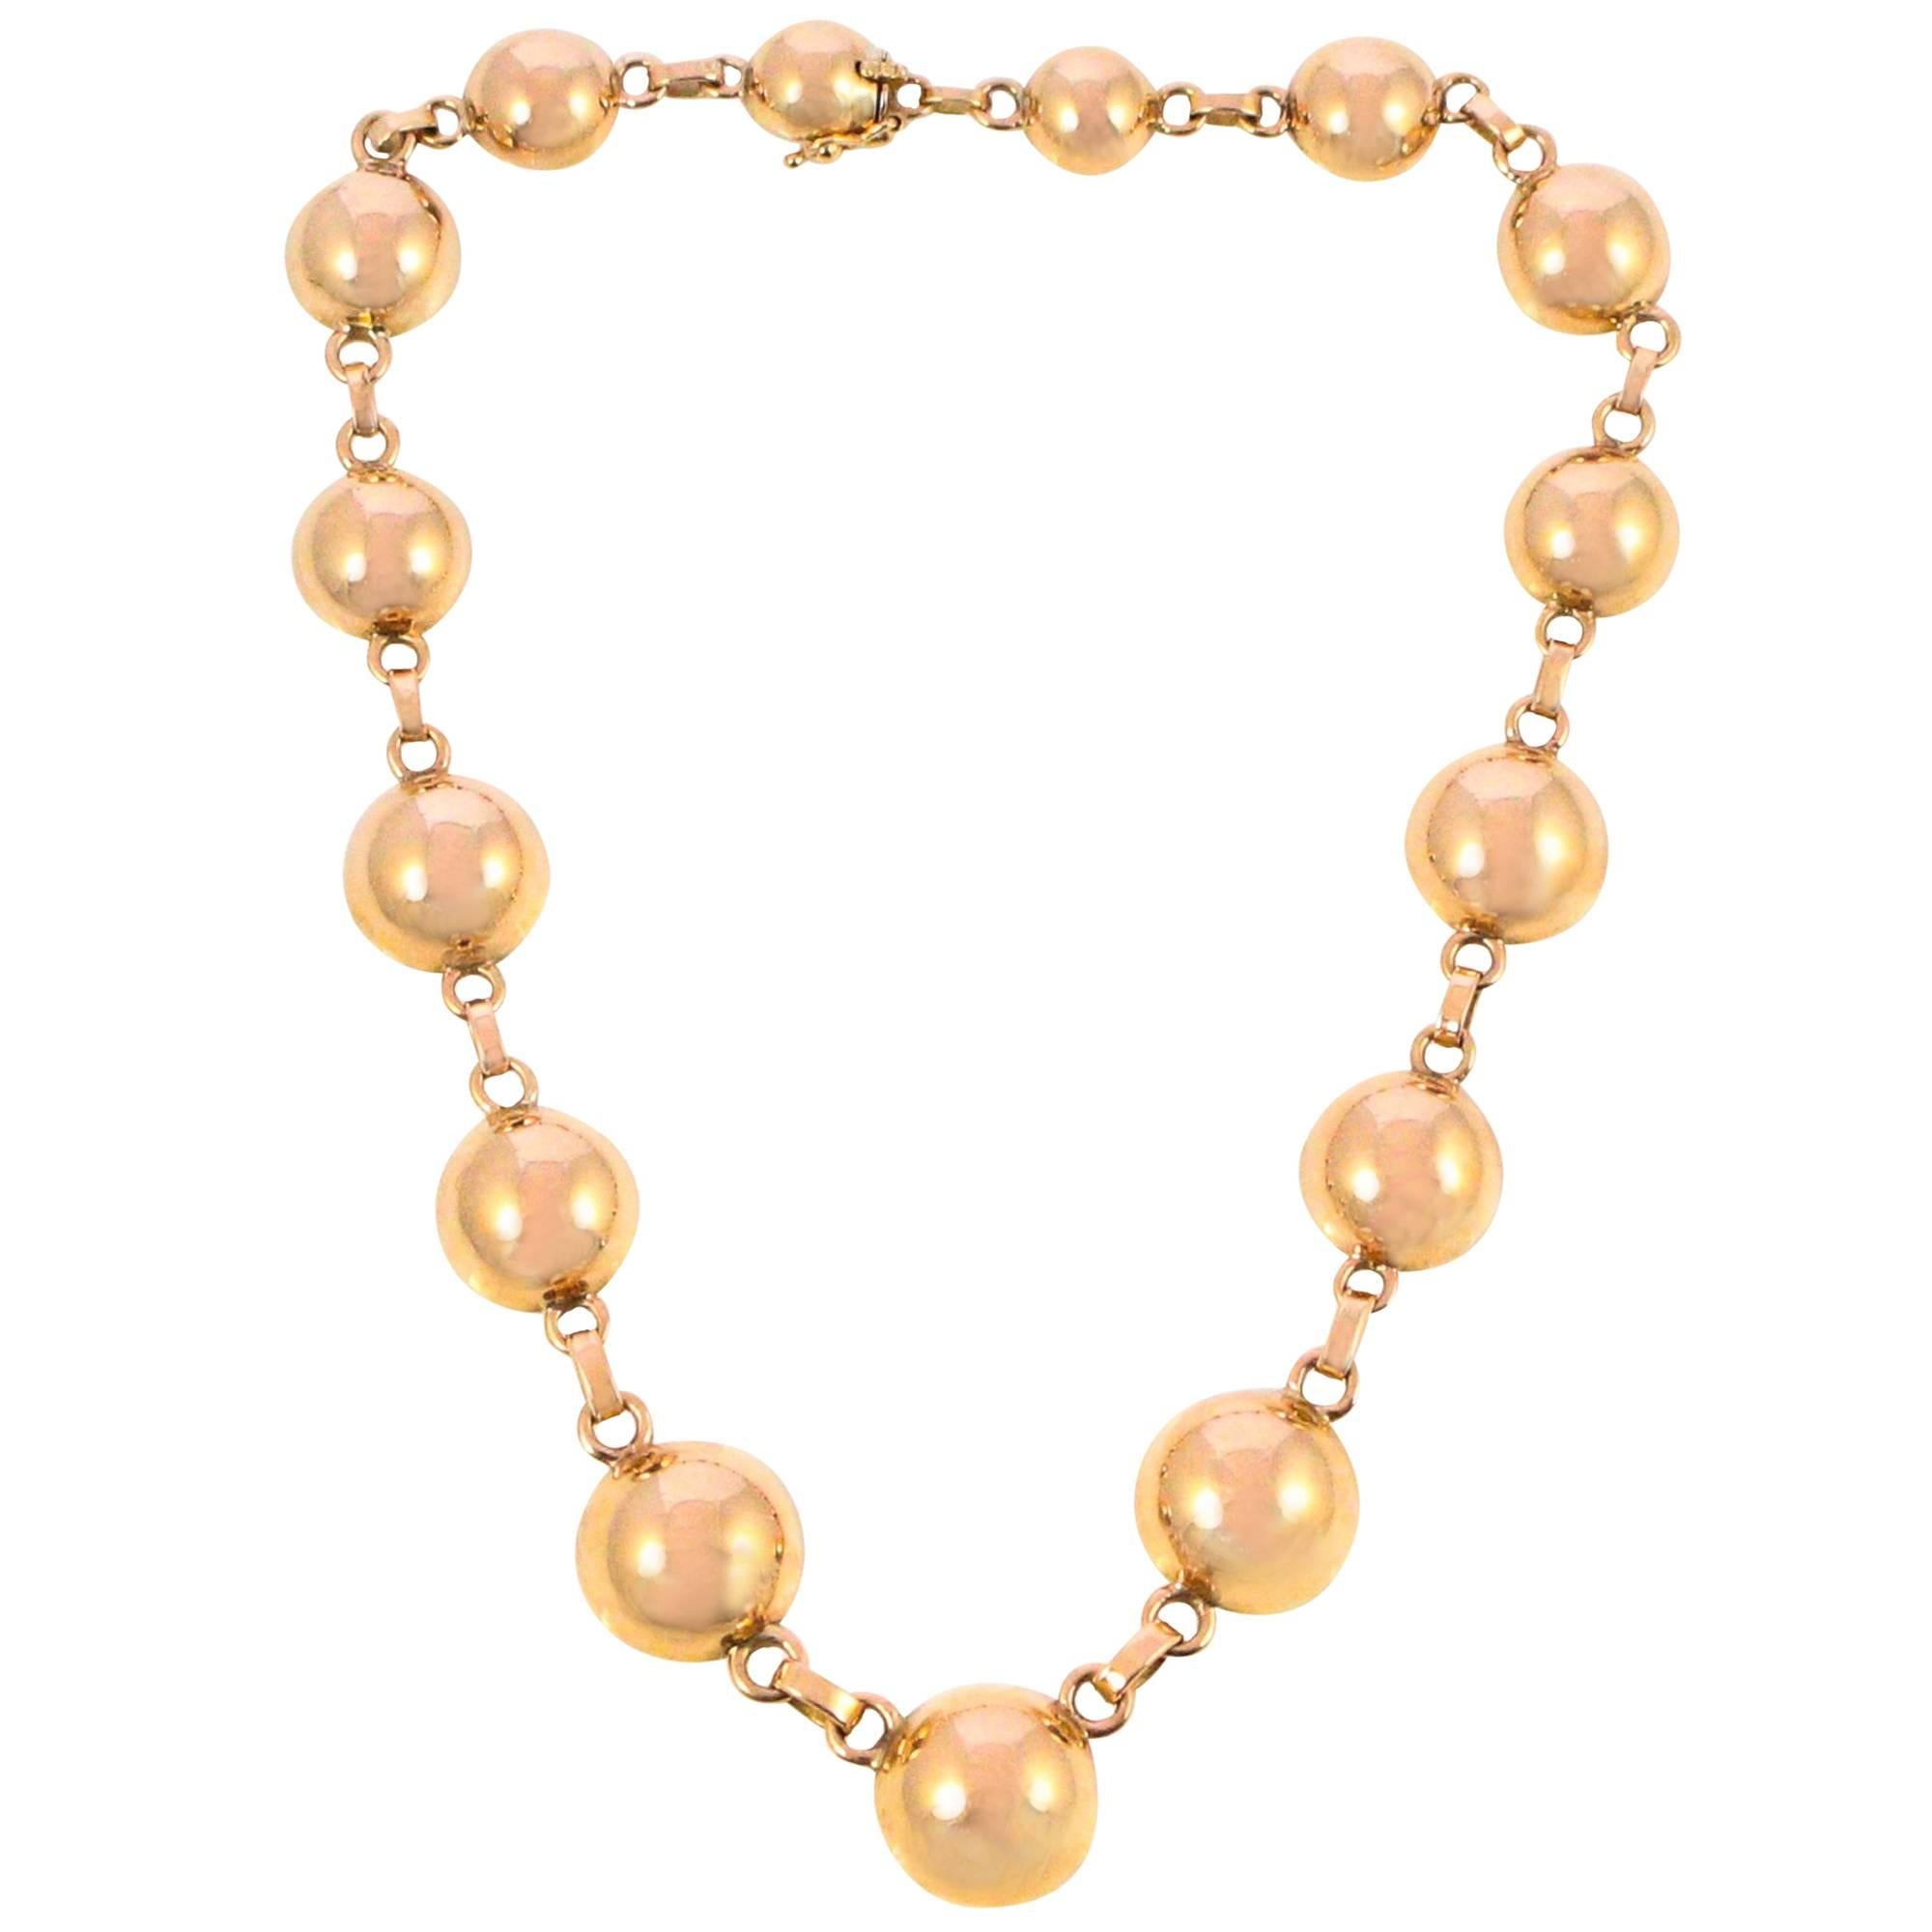 Retro Rose Gold Button Ball Style Necklace